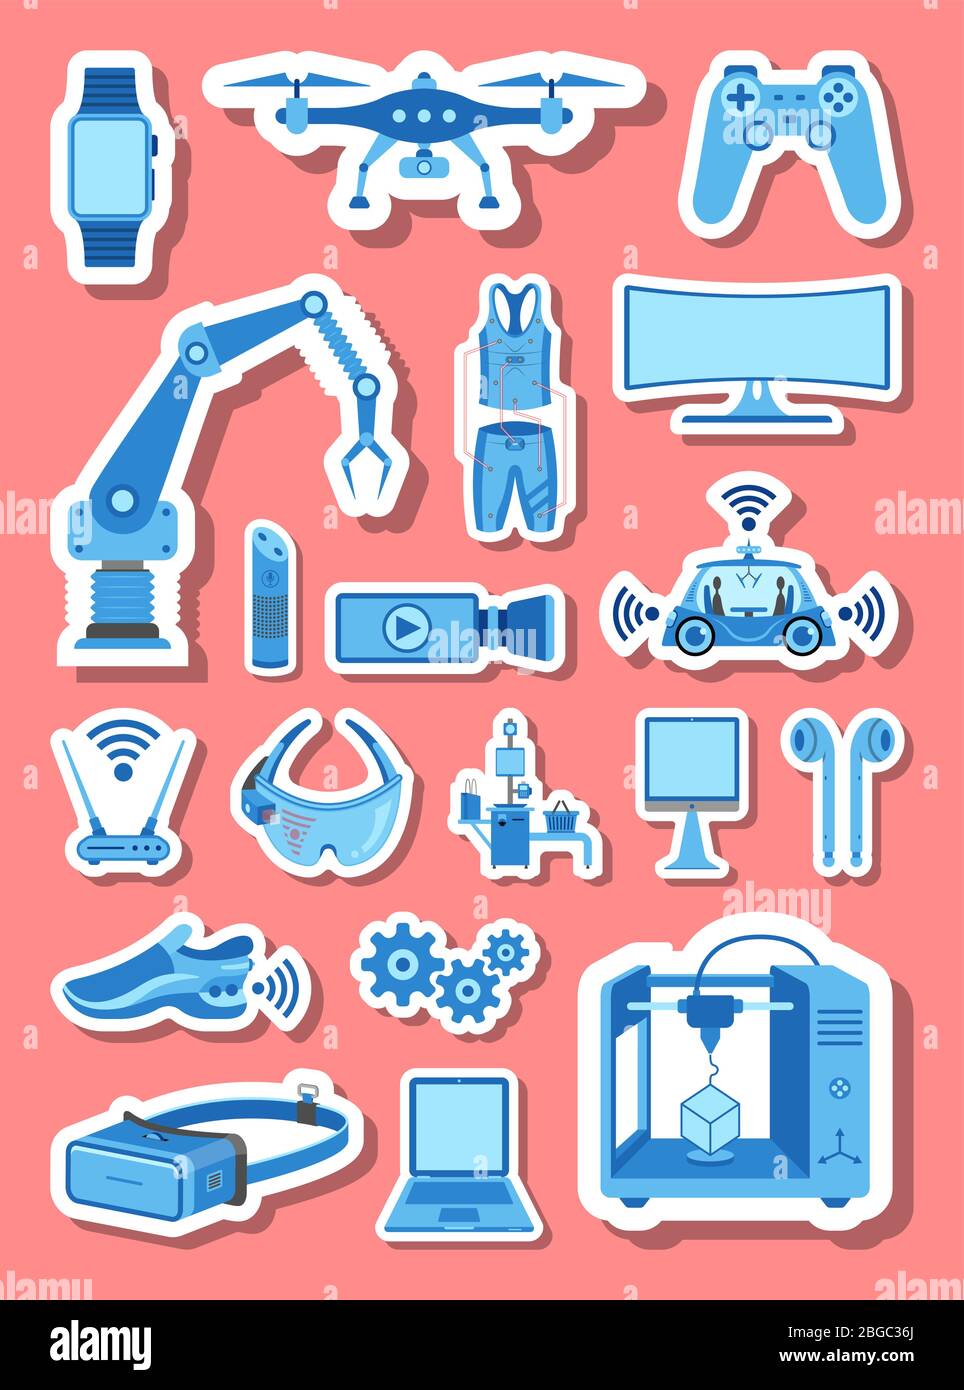 High technology icons group set in blue tones. All the icon objects, shadows and background are in different layers. Stock Vector